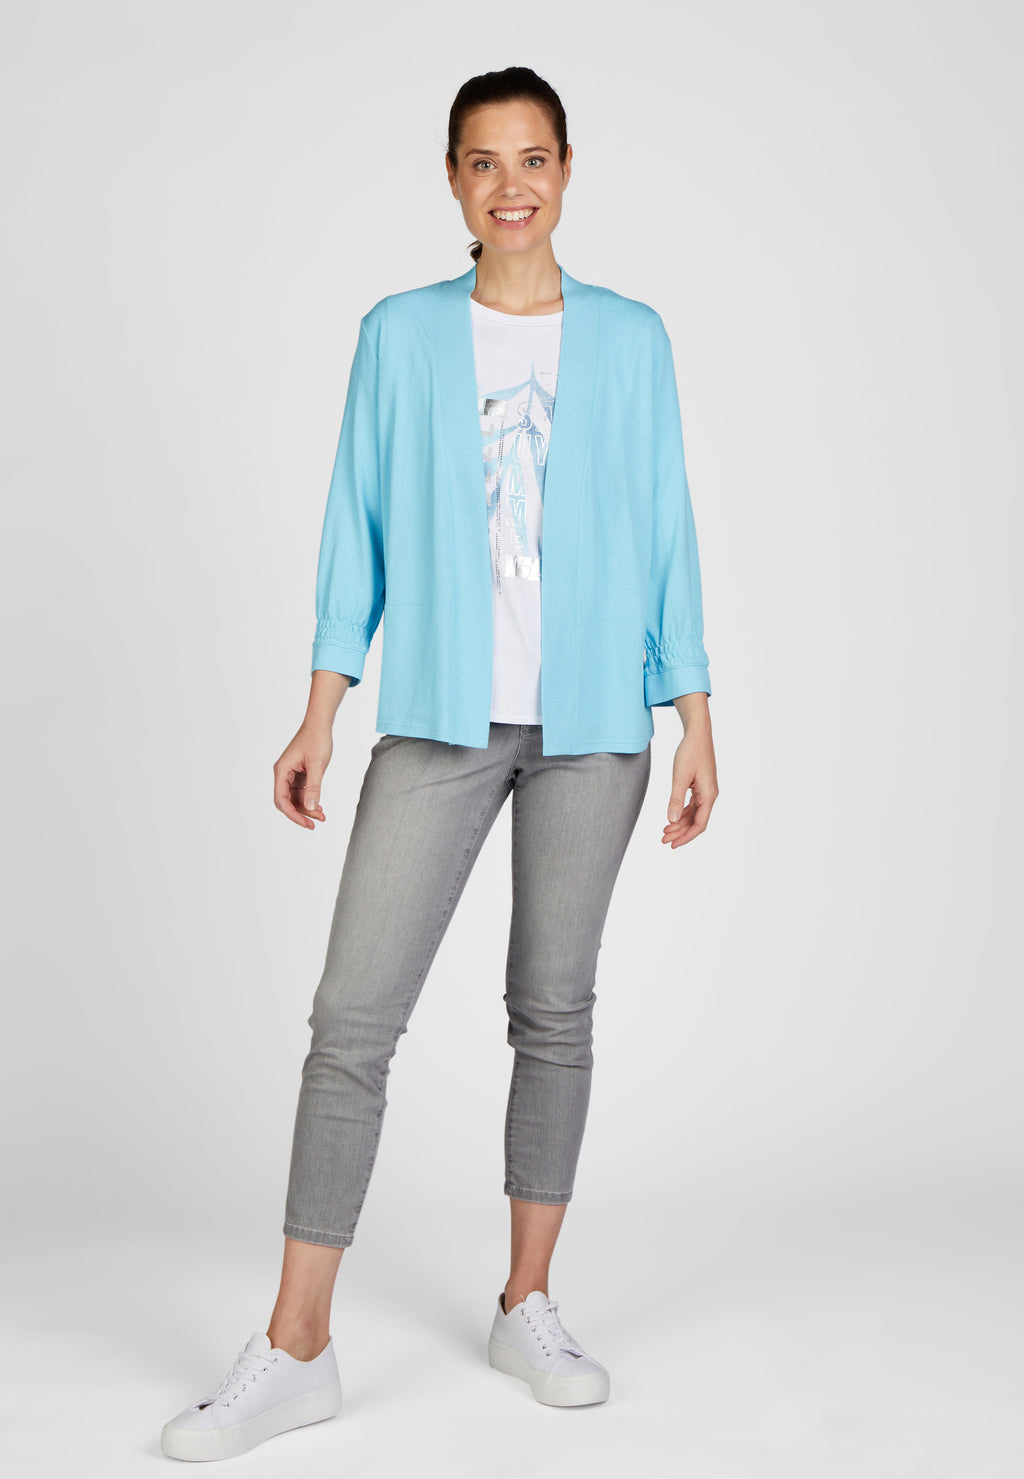 Rabe salty breeze collection light edge to edge sky blue cardigan, product code 52-123221